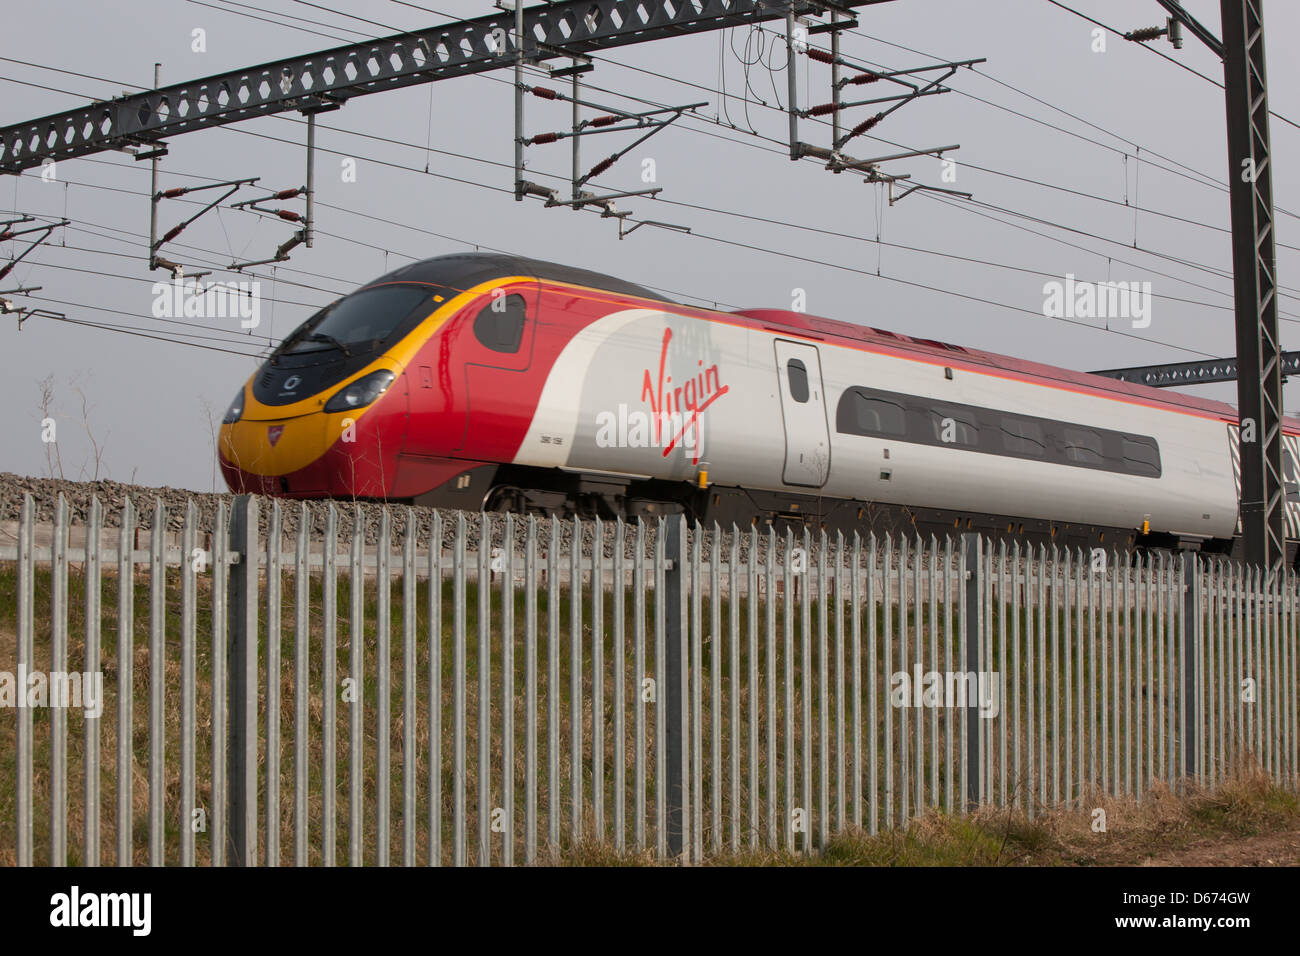 A Virgin train on the West Coast Mainline in the Midlands. Stock Photo